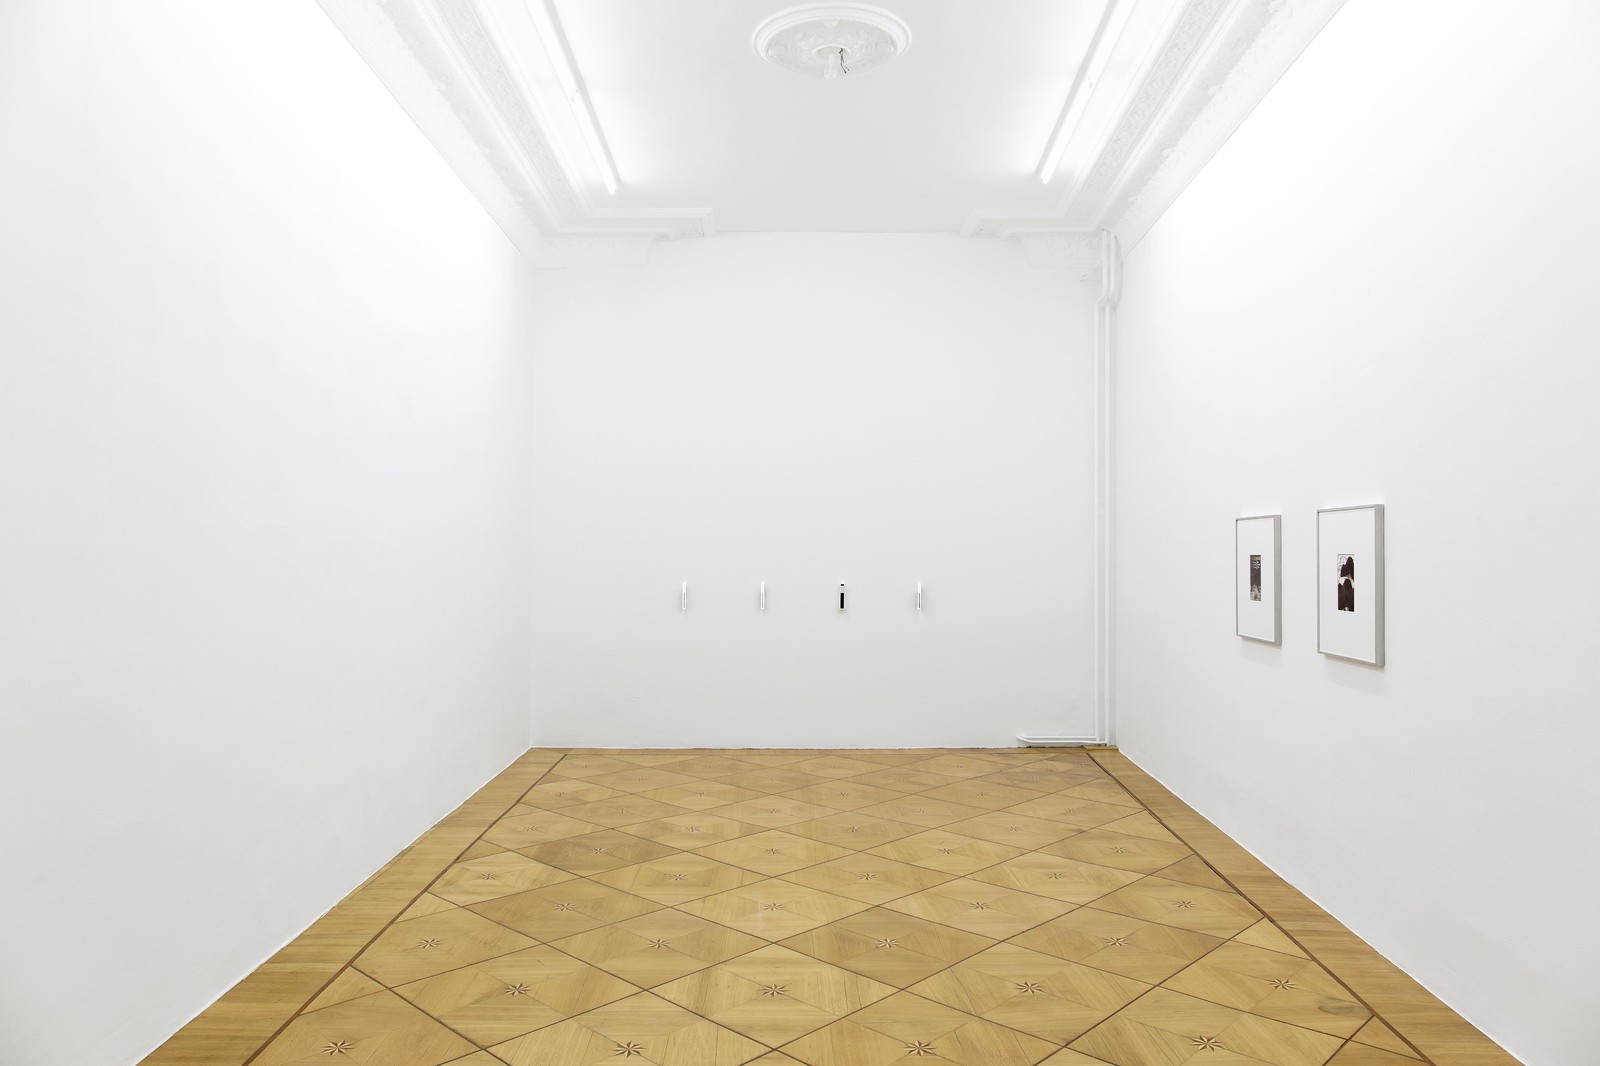 Installation view, A Simulated Future amid Collapse, Société, Berlin, 2015